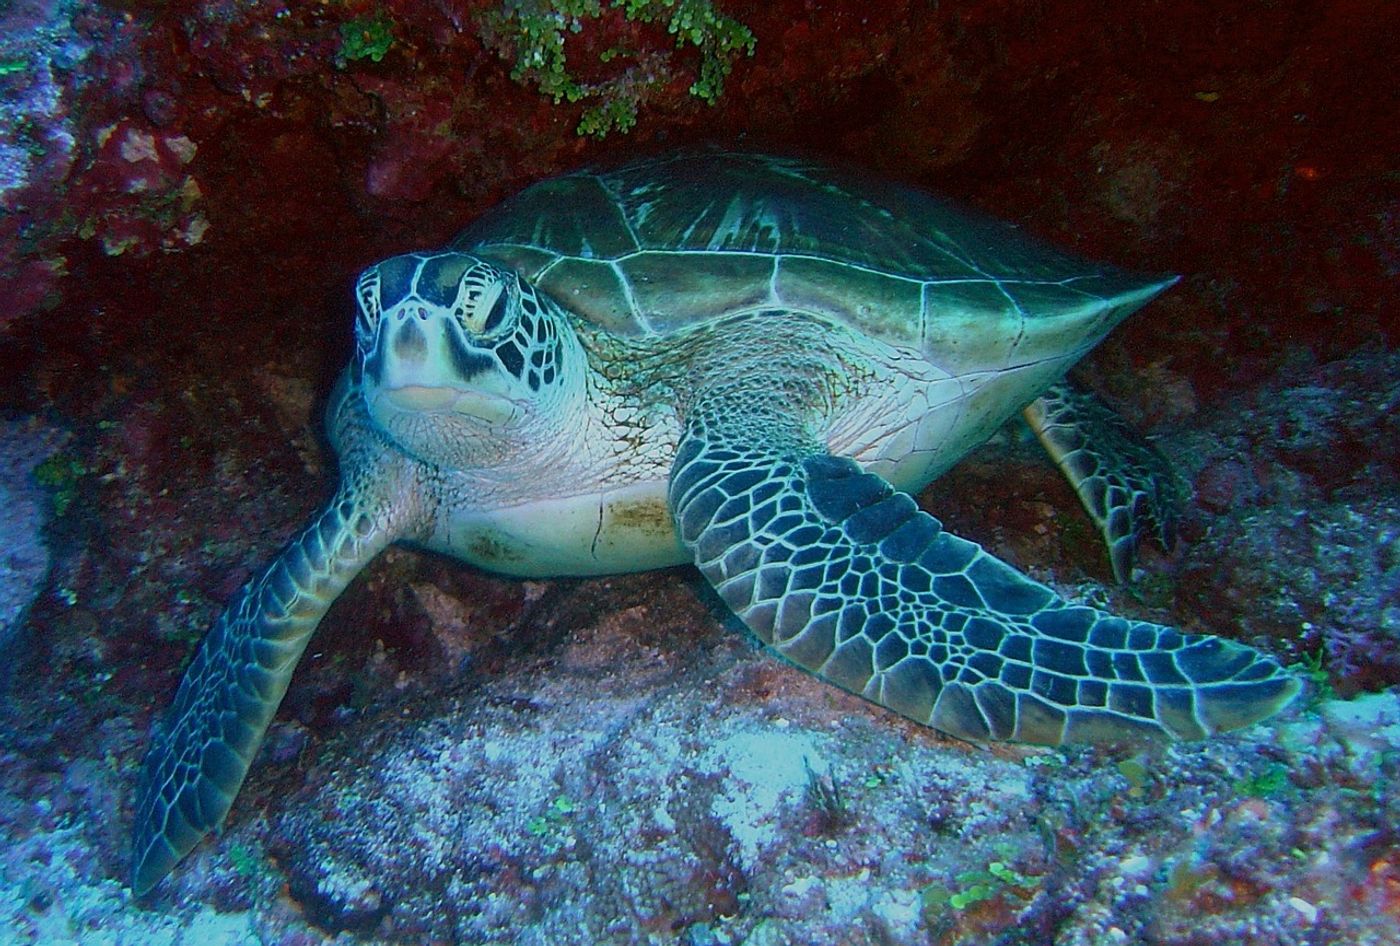 The IUCN recognizes the green sea turtle as an endangered species; unfortunately, too many females are being born.